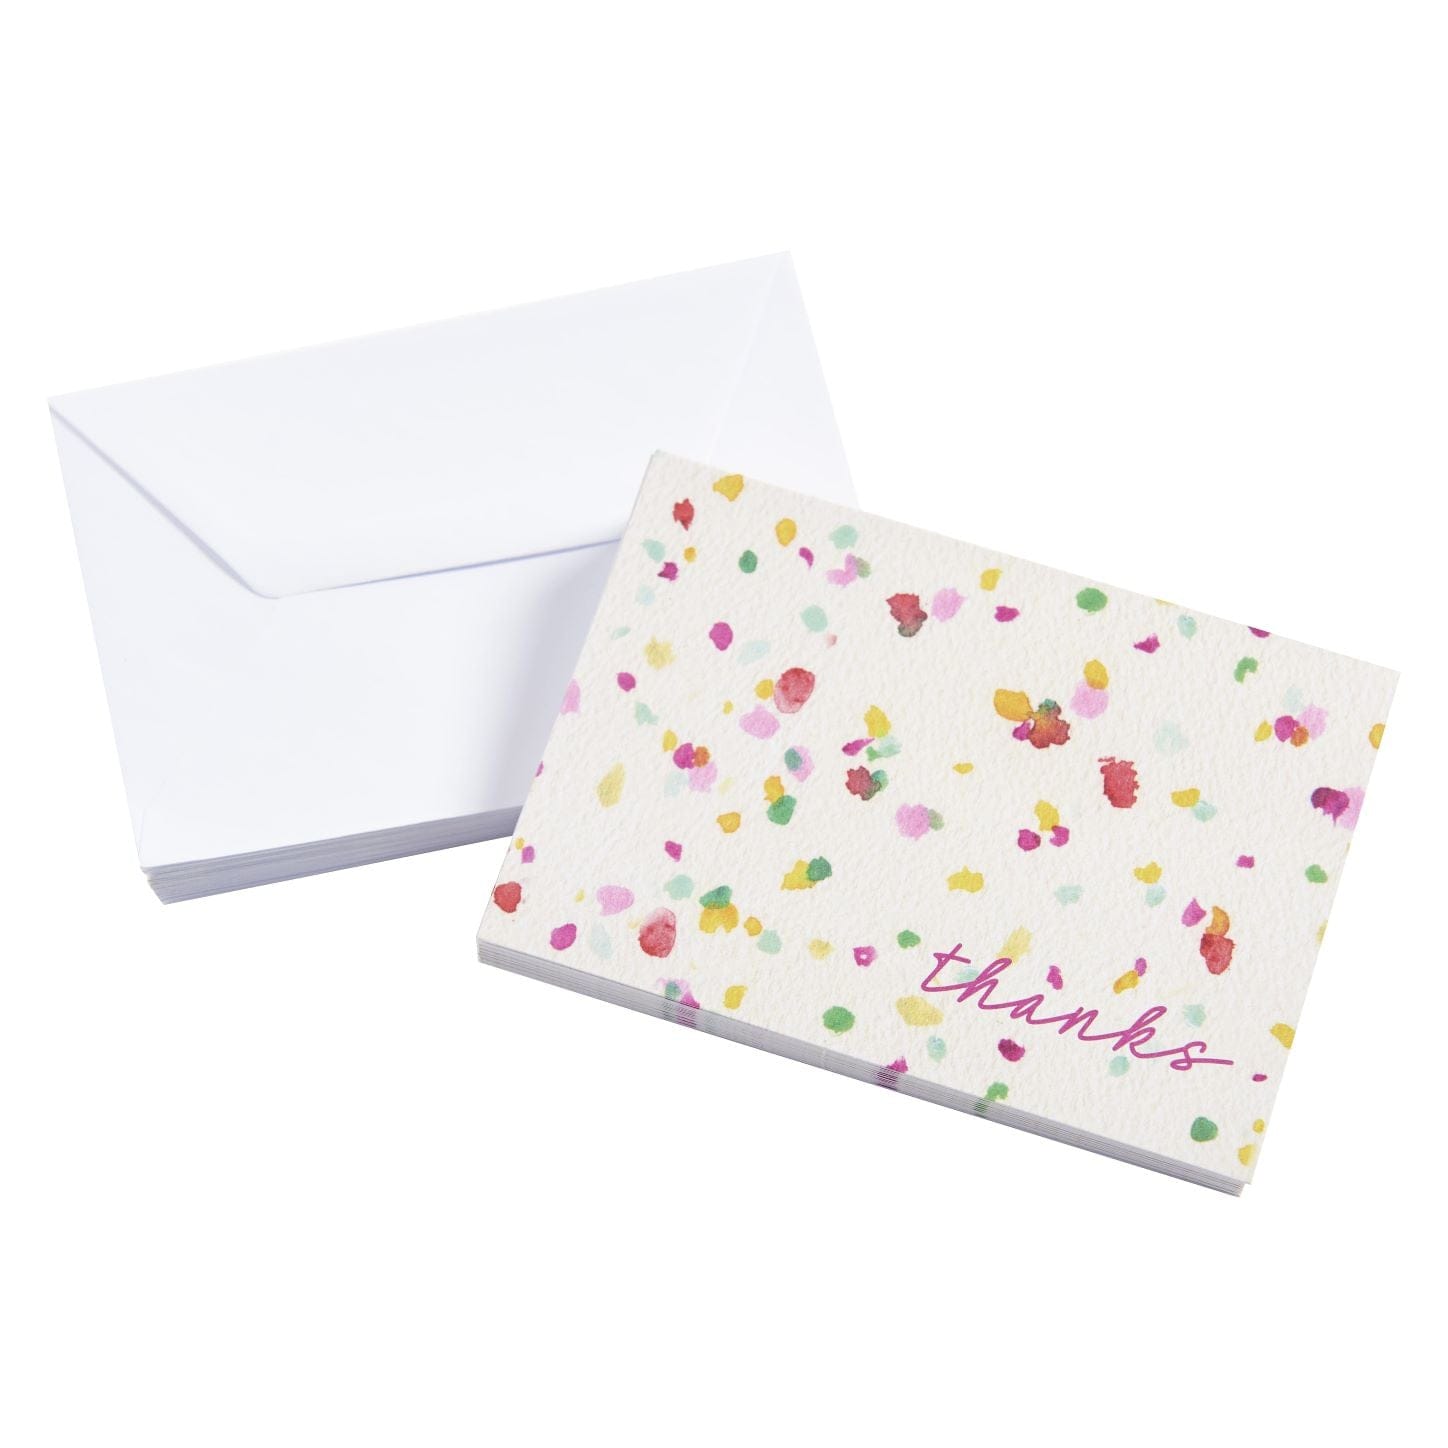 Confetti Thank You Cards - 20 Count Gartner Studios Note Cards 94930